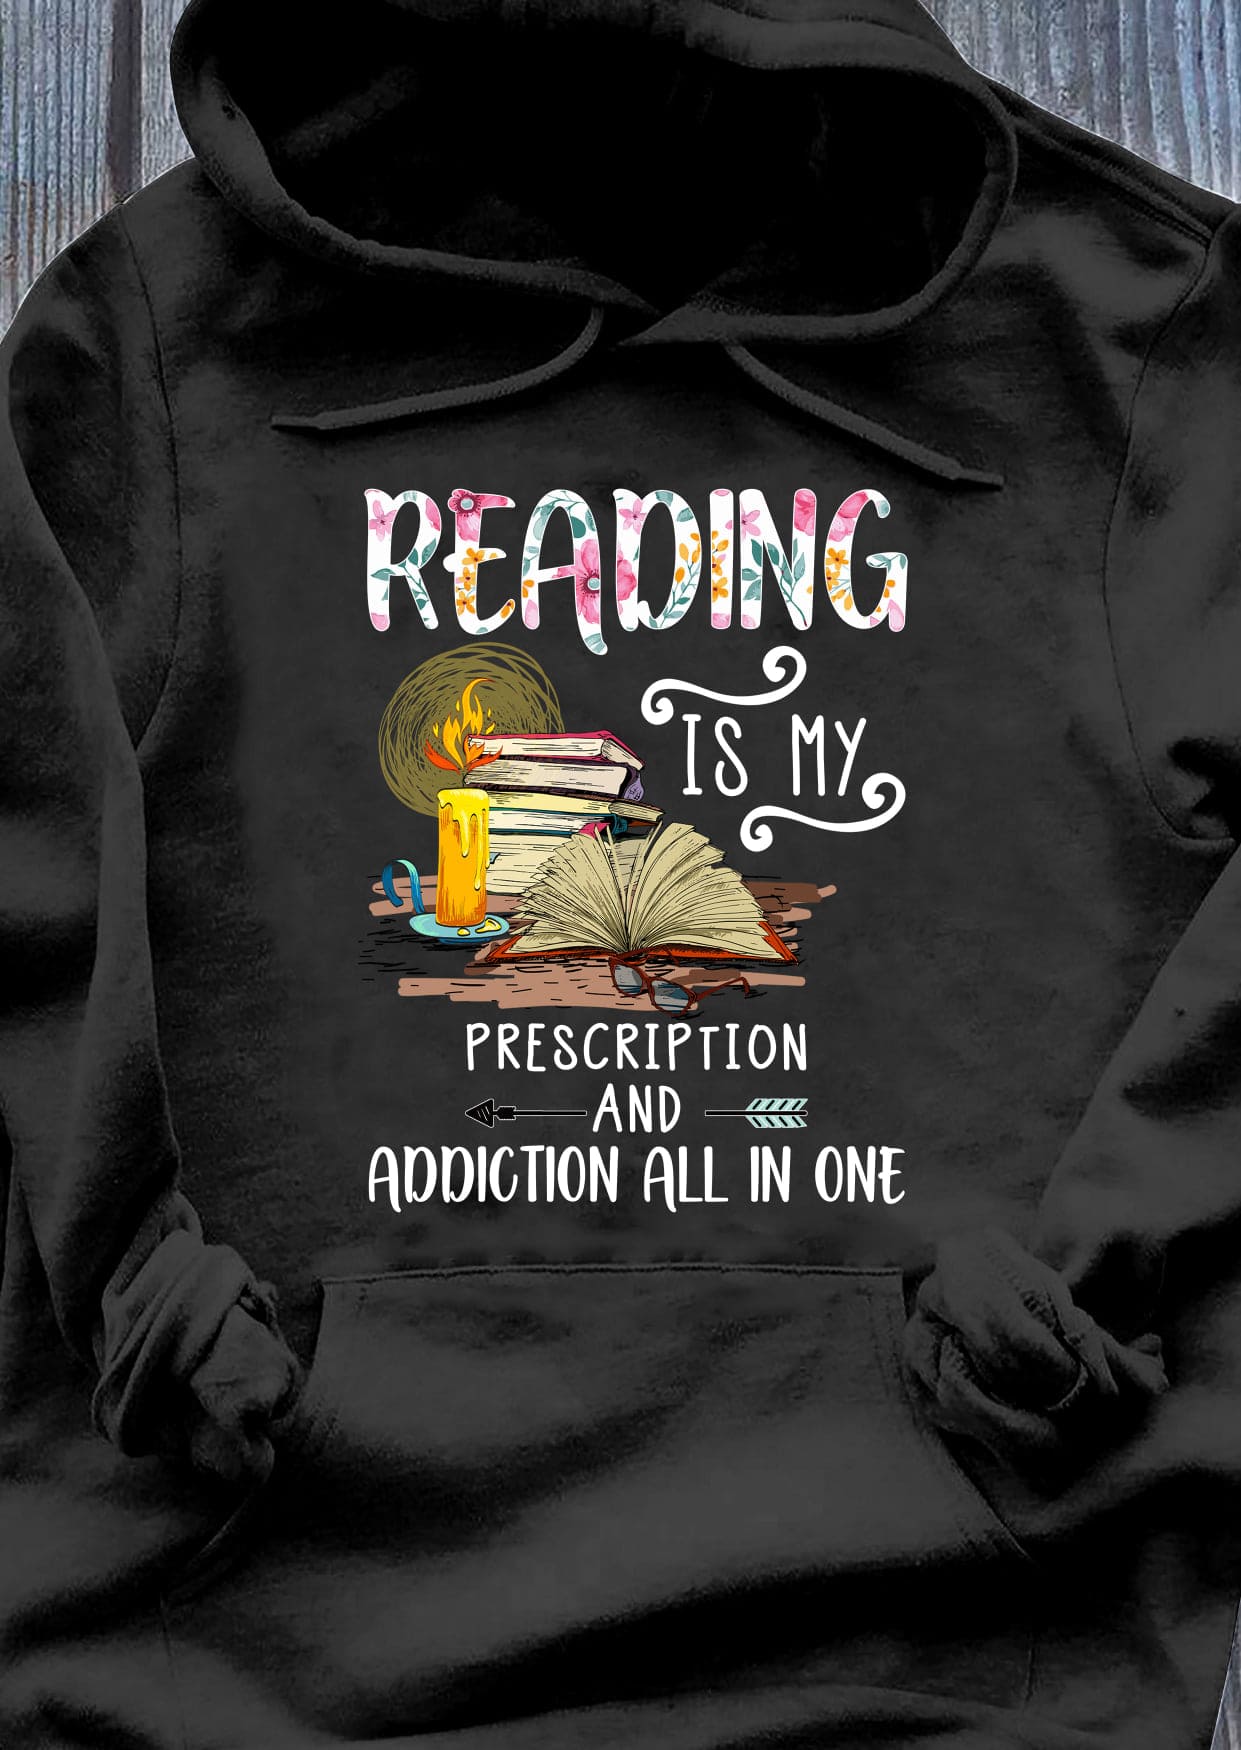 Reading is my prescription and addiction all in one - Book addiction, gift for bookaholic